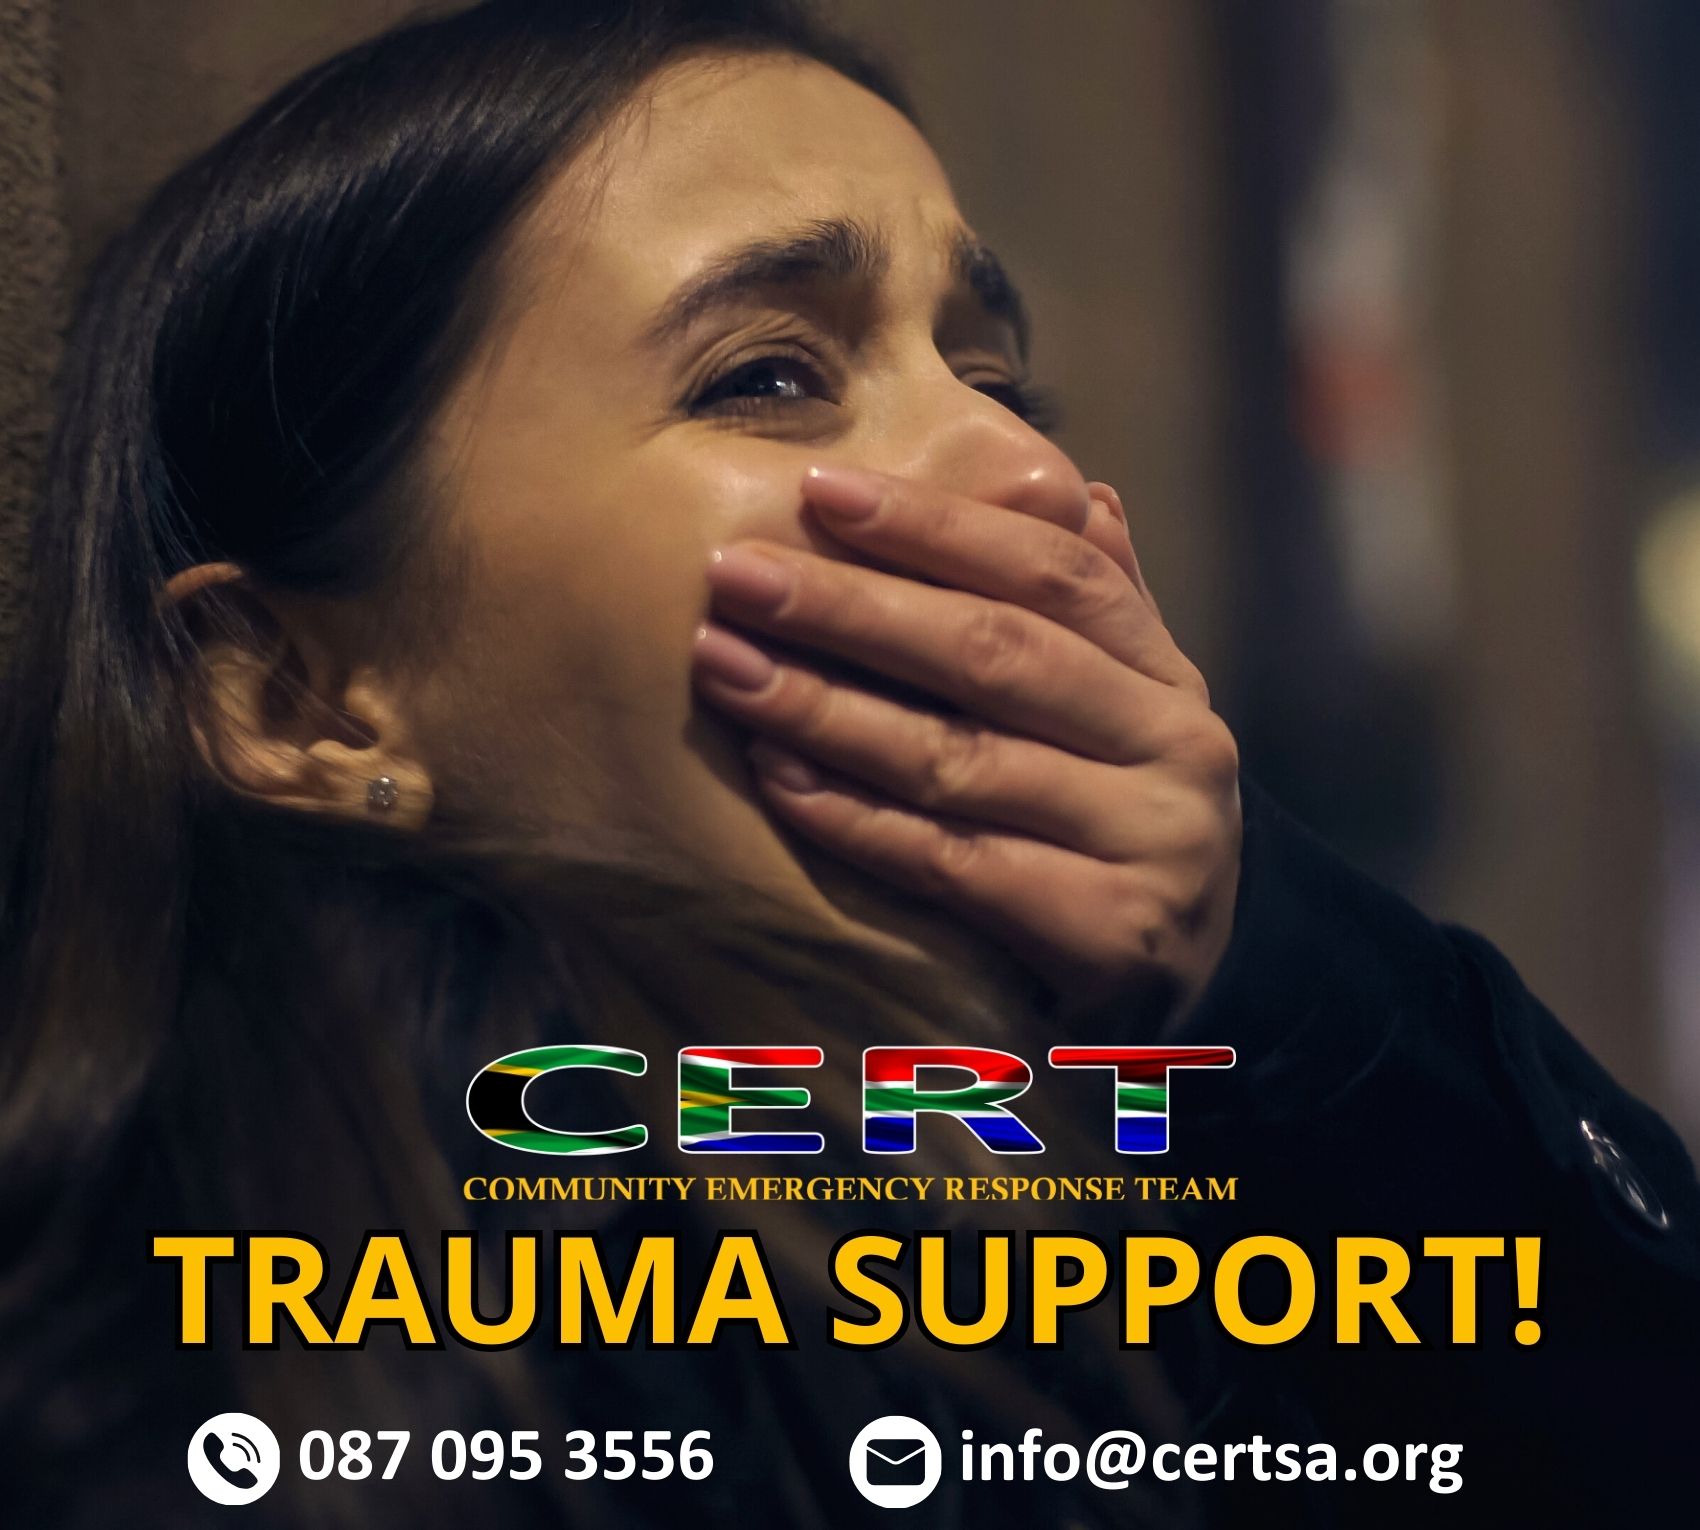 CERT-SA trauma support division provides assistance to members of the community who have experienced trauma